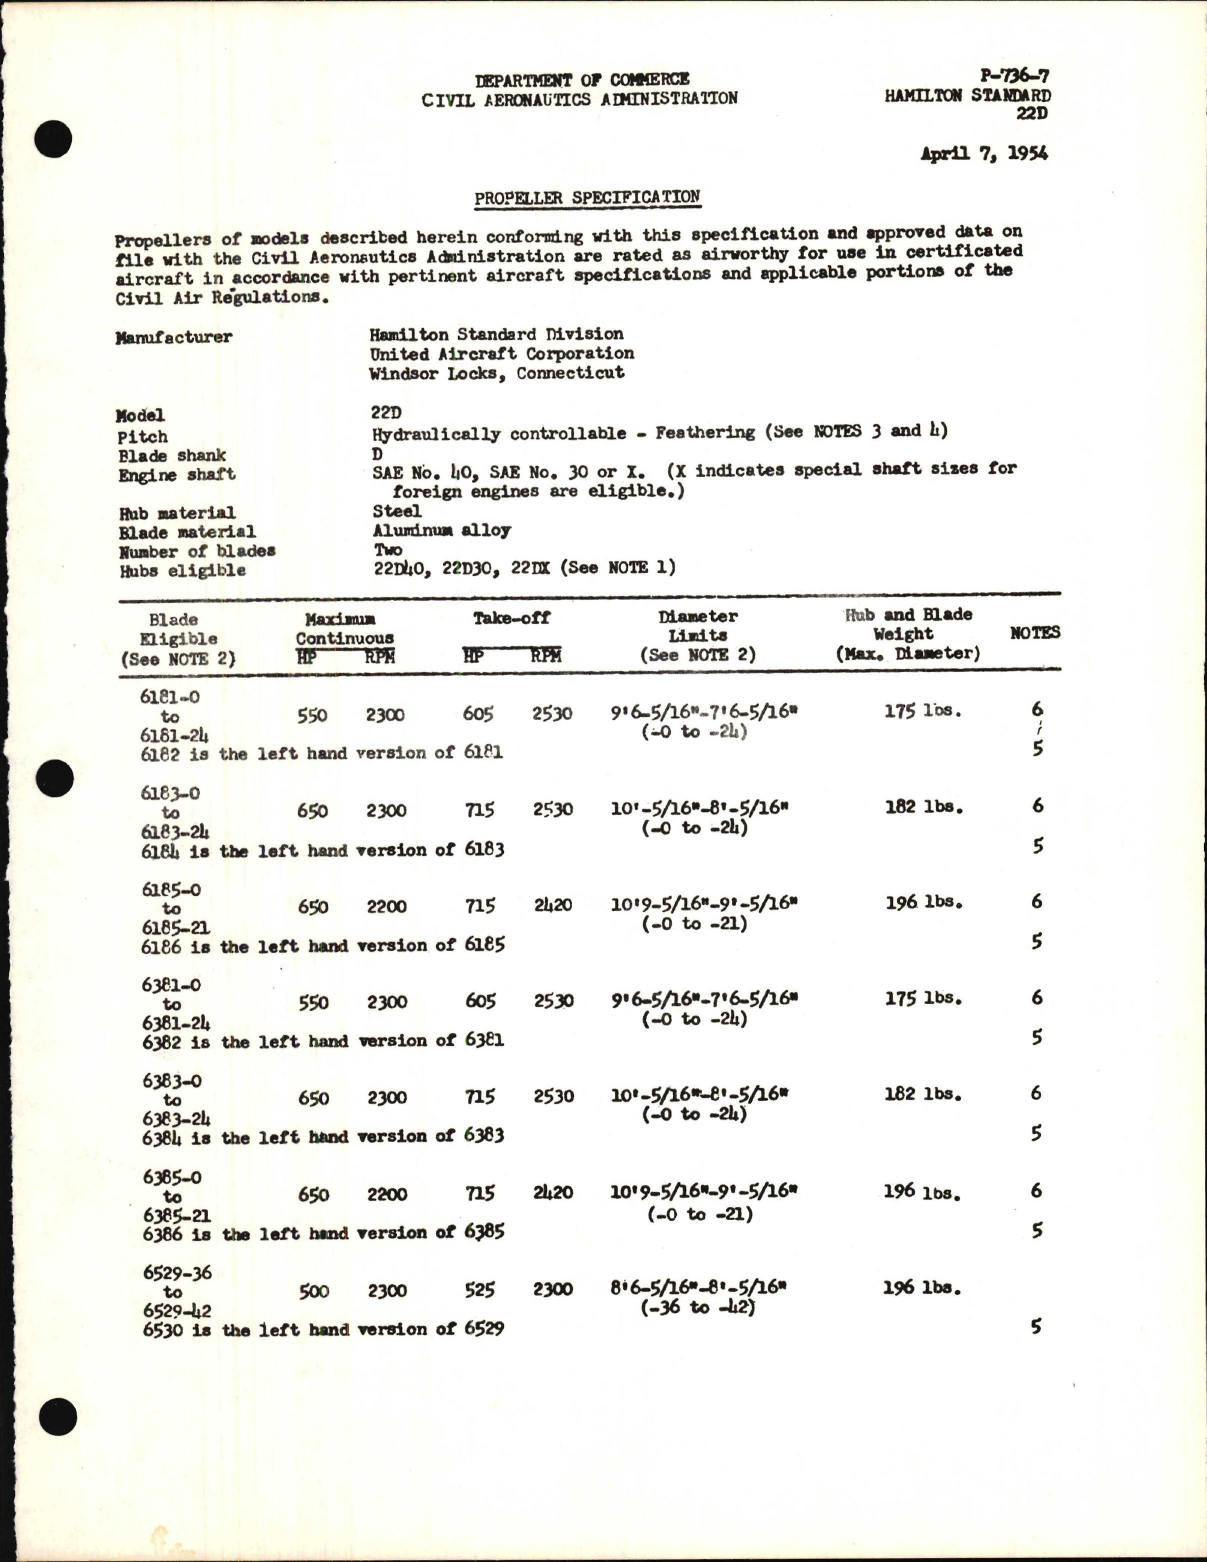 Sample page 1 from AirCorps Library document: 22D